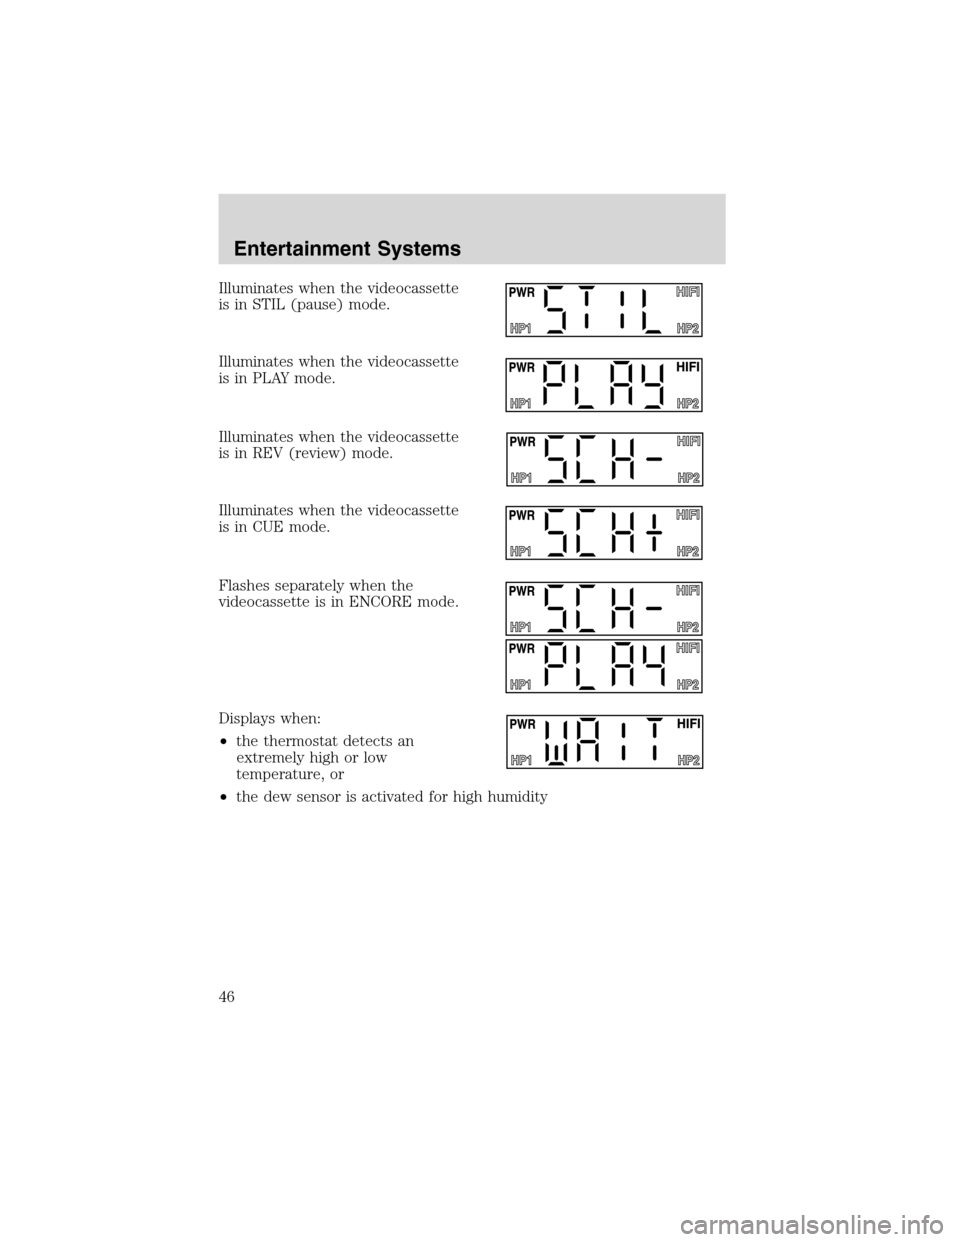 FORD E SERIES 2003 4.G Owners Manual Illuminates when the videocassette
is in STIL (pause) mode.
Illuminates when the videocassette
is in PLAY mode.
Illuminates when the videocassette
is in REV (review) mode.
Illuminates when the videoca